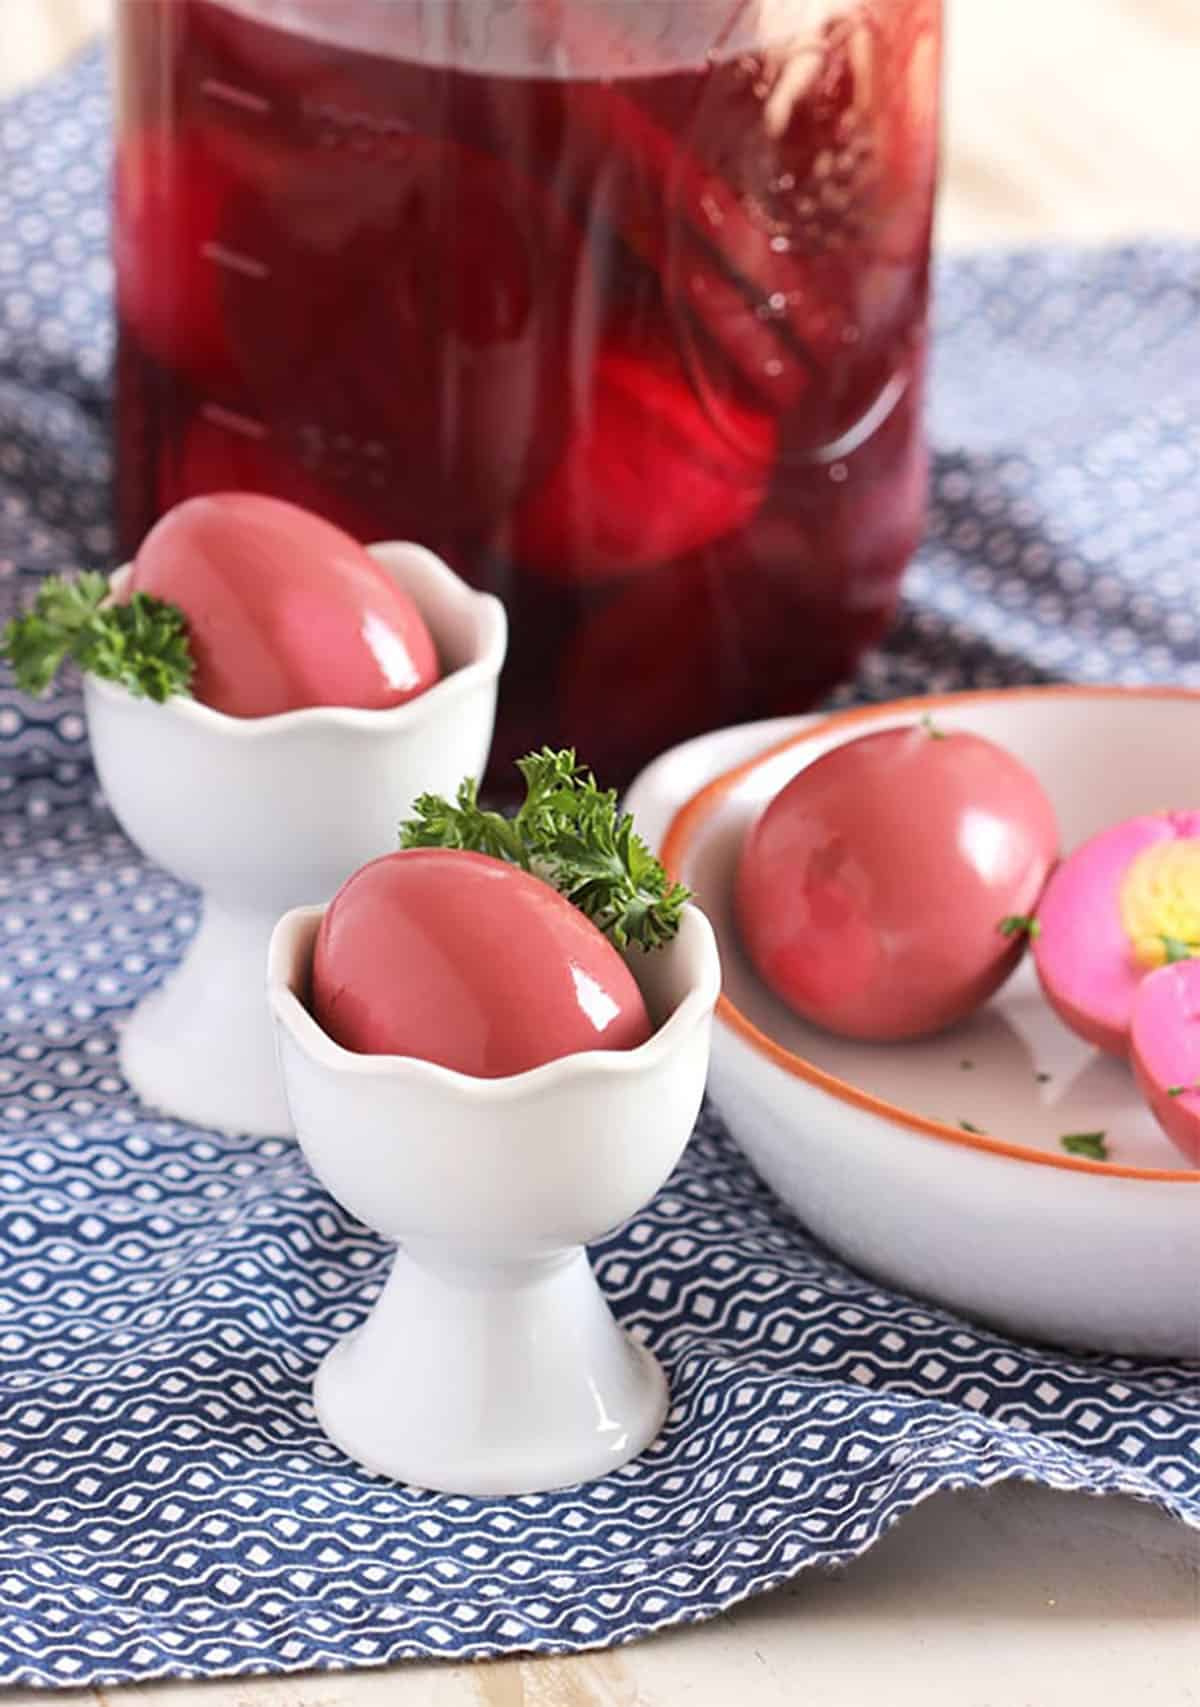 Two white egg cups with pickled beet eggs in them on a blue and white napkin with a jar in the background showing pickled eggs and beets in a jar.